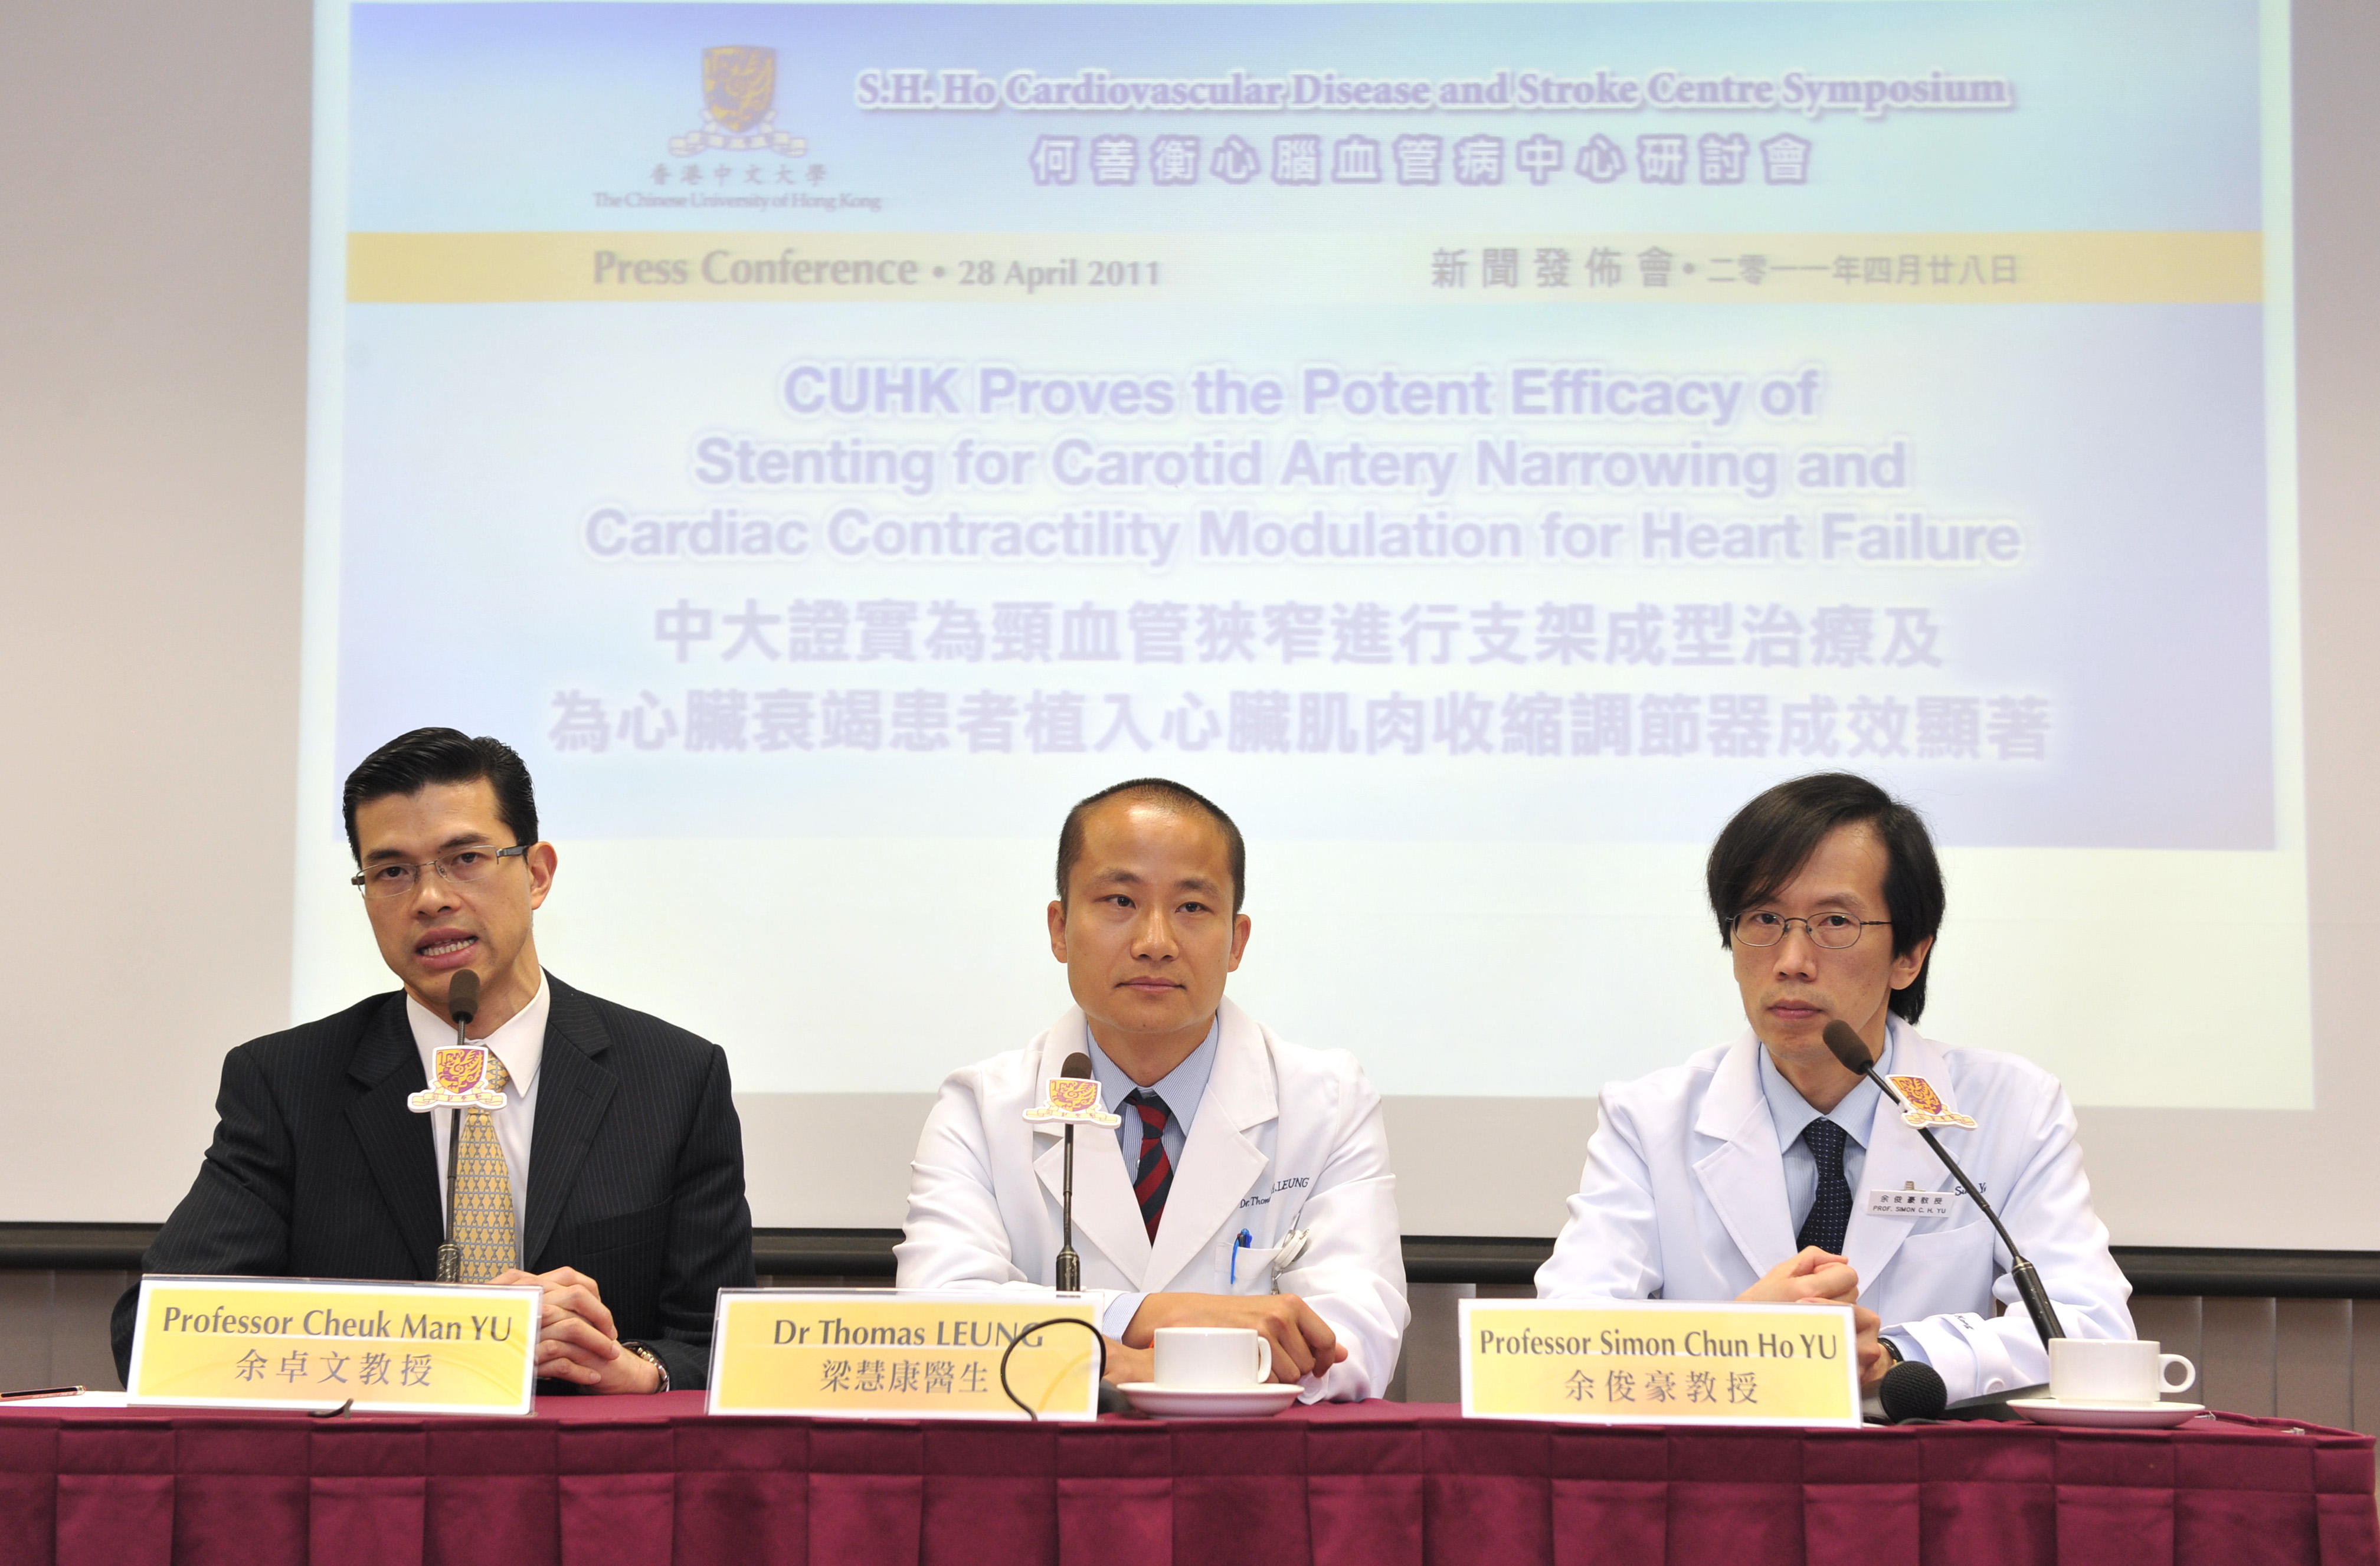  From left) Prof. Cheuk Man YU, Chairman, Department of Medicine and Therapeutics, Head of Division of Cardiology, CUHK; Prof. Thomas Wai Hong LEUNG, Associate Professor, Department of Medicine and Therapeutics, CUHK; and Prof. Simon Chun Ho YU, Professor, Department of Imaging and Interventional Radiology, CUHK